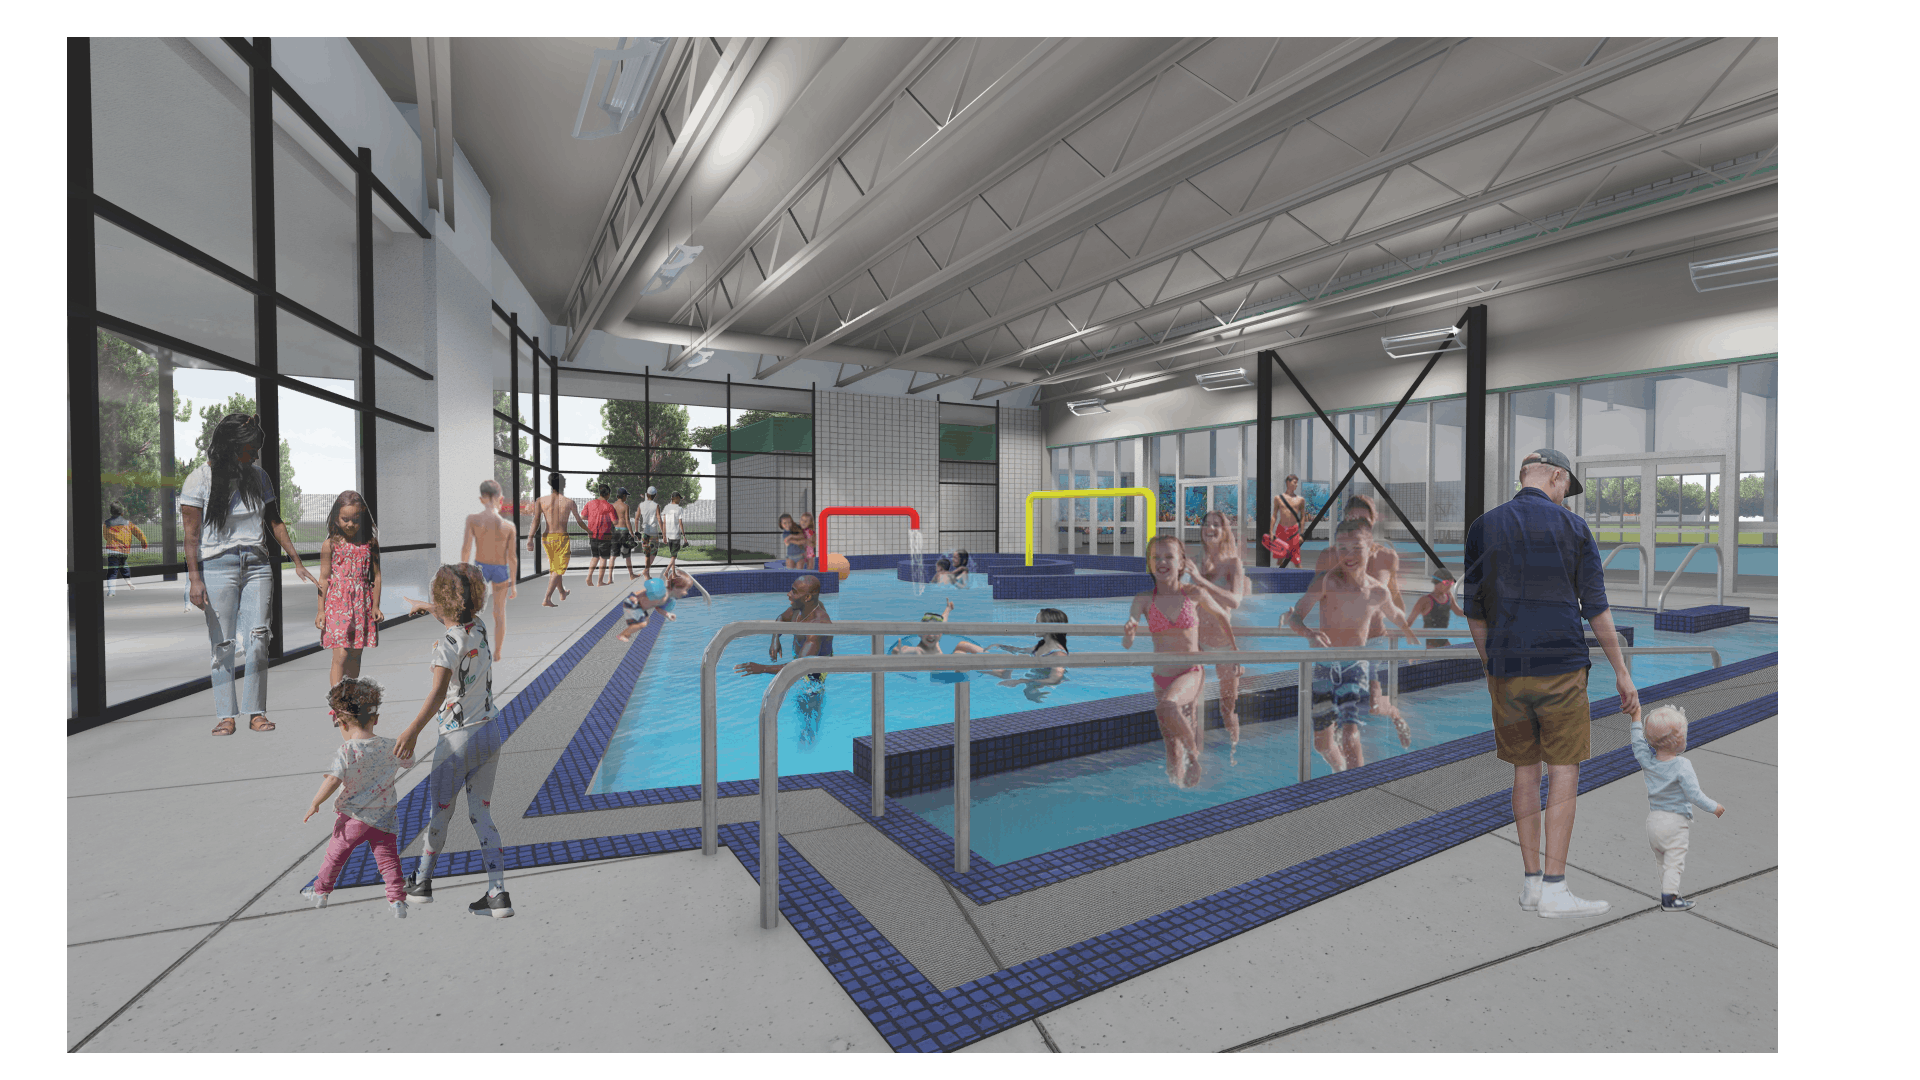 An interior perspective of the planned renovation to one of Sheldon's pools.